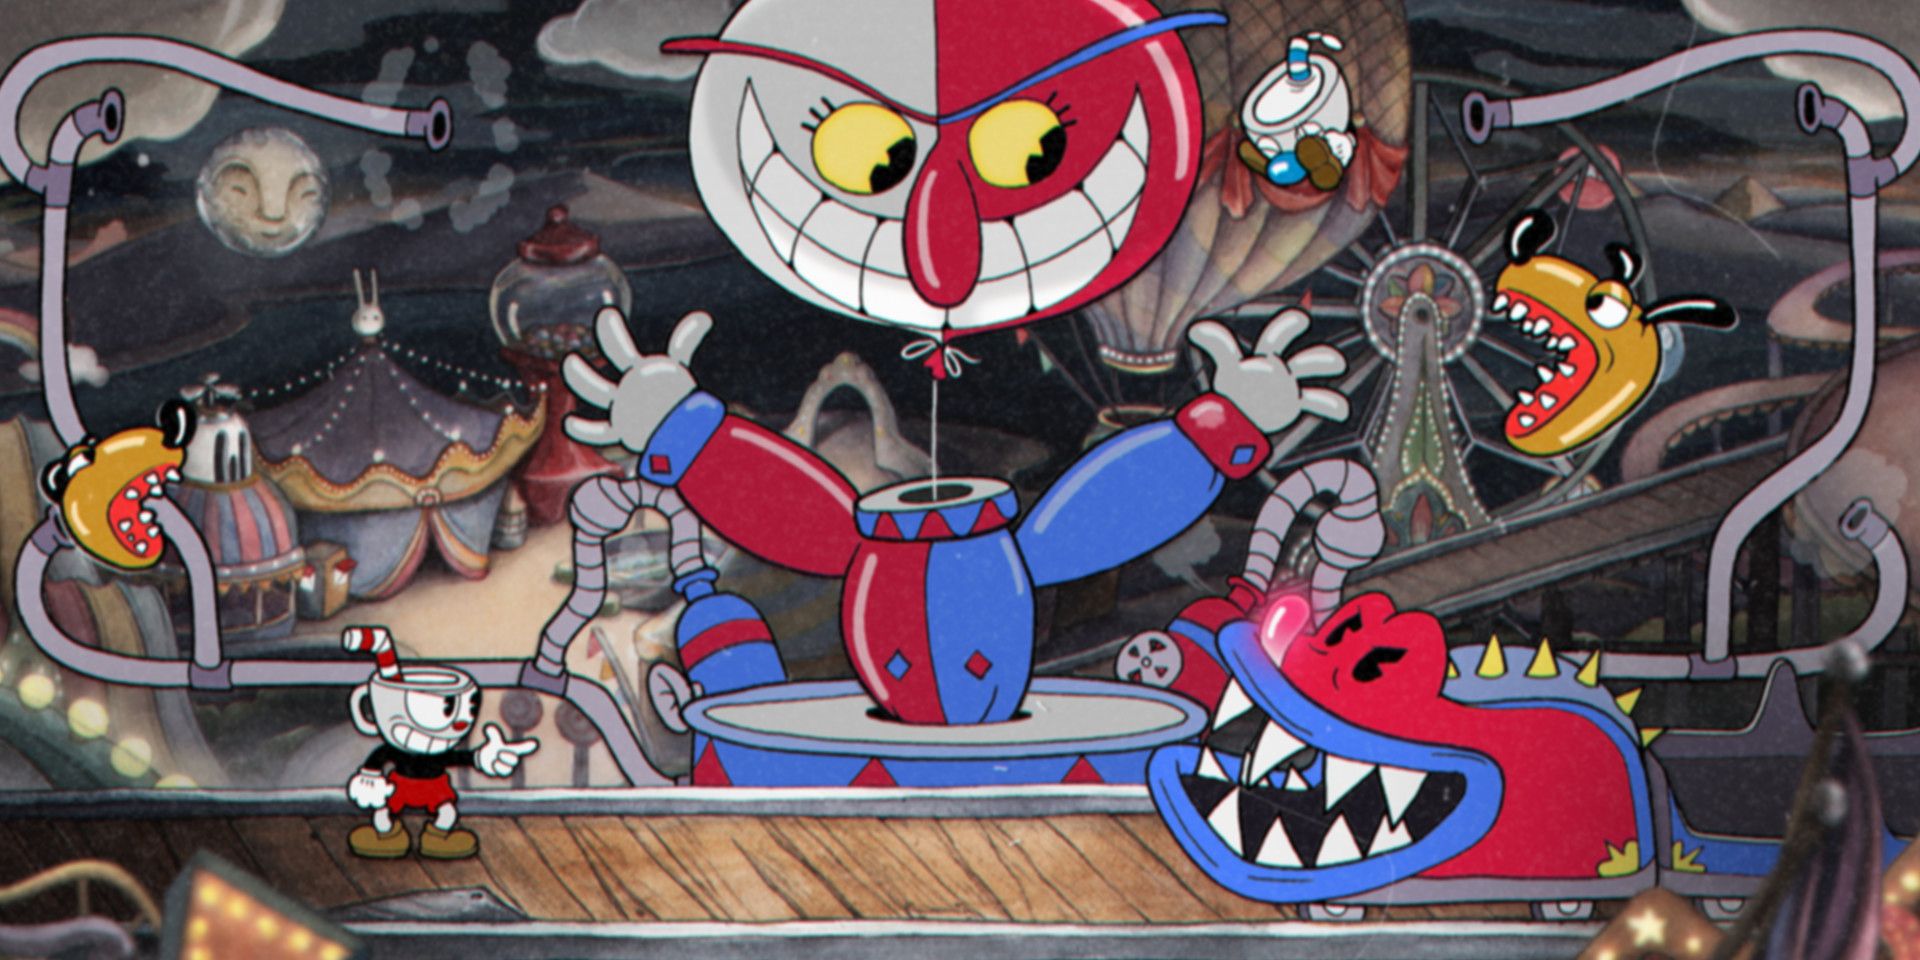 Cuphead's Carnival Kerfuffle with assorted monsters and a giant, grinning balloon.